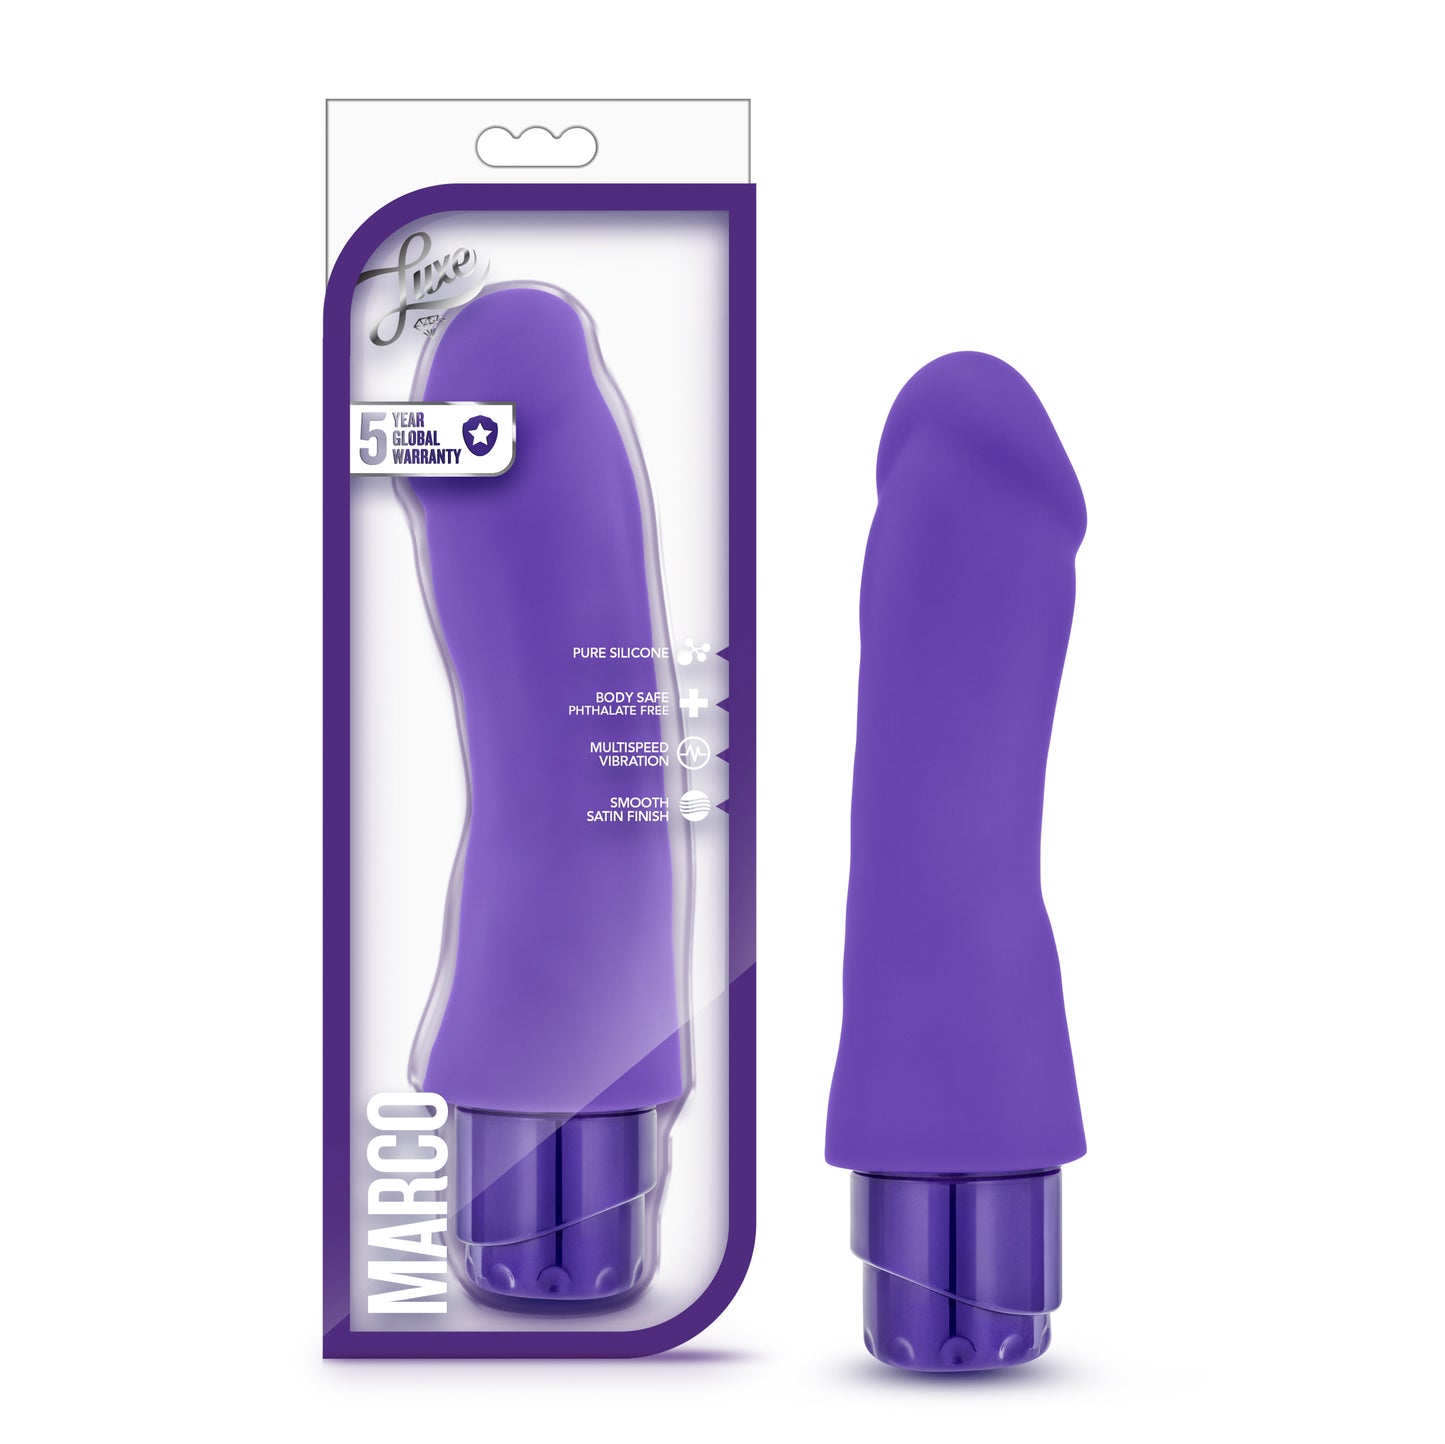 Luxe Marco Purple - Just for you desires